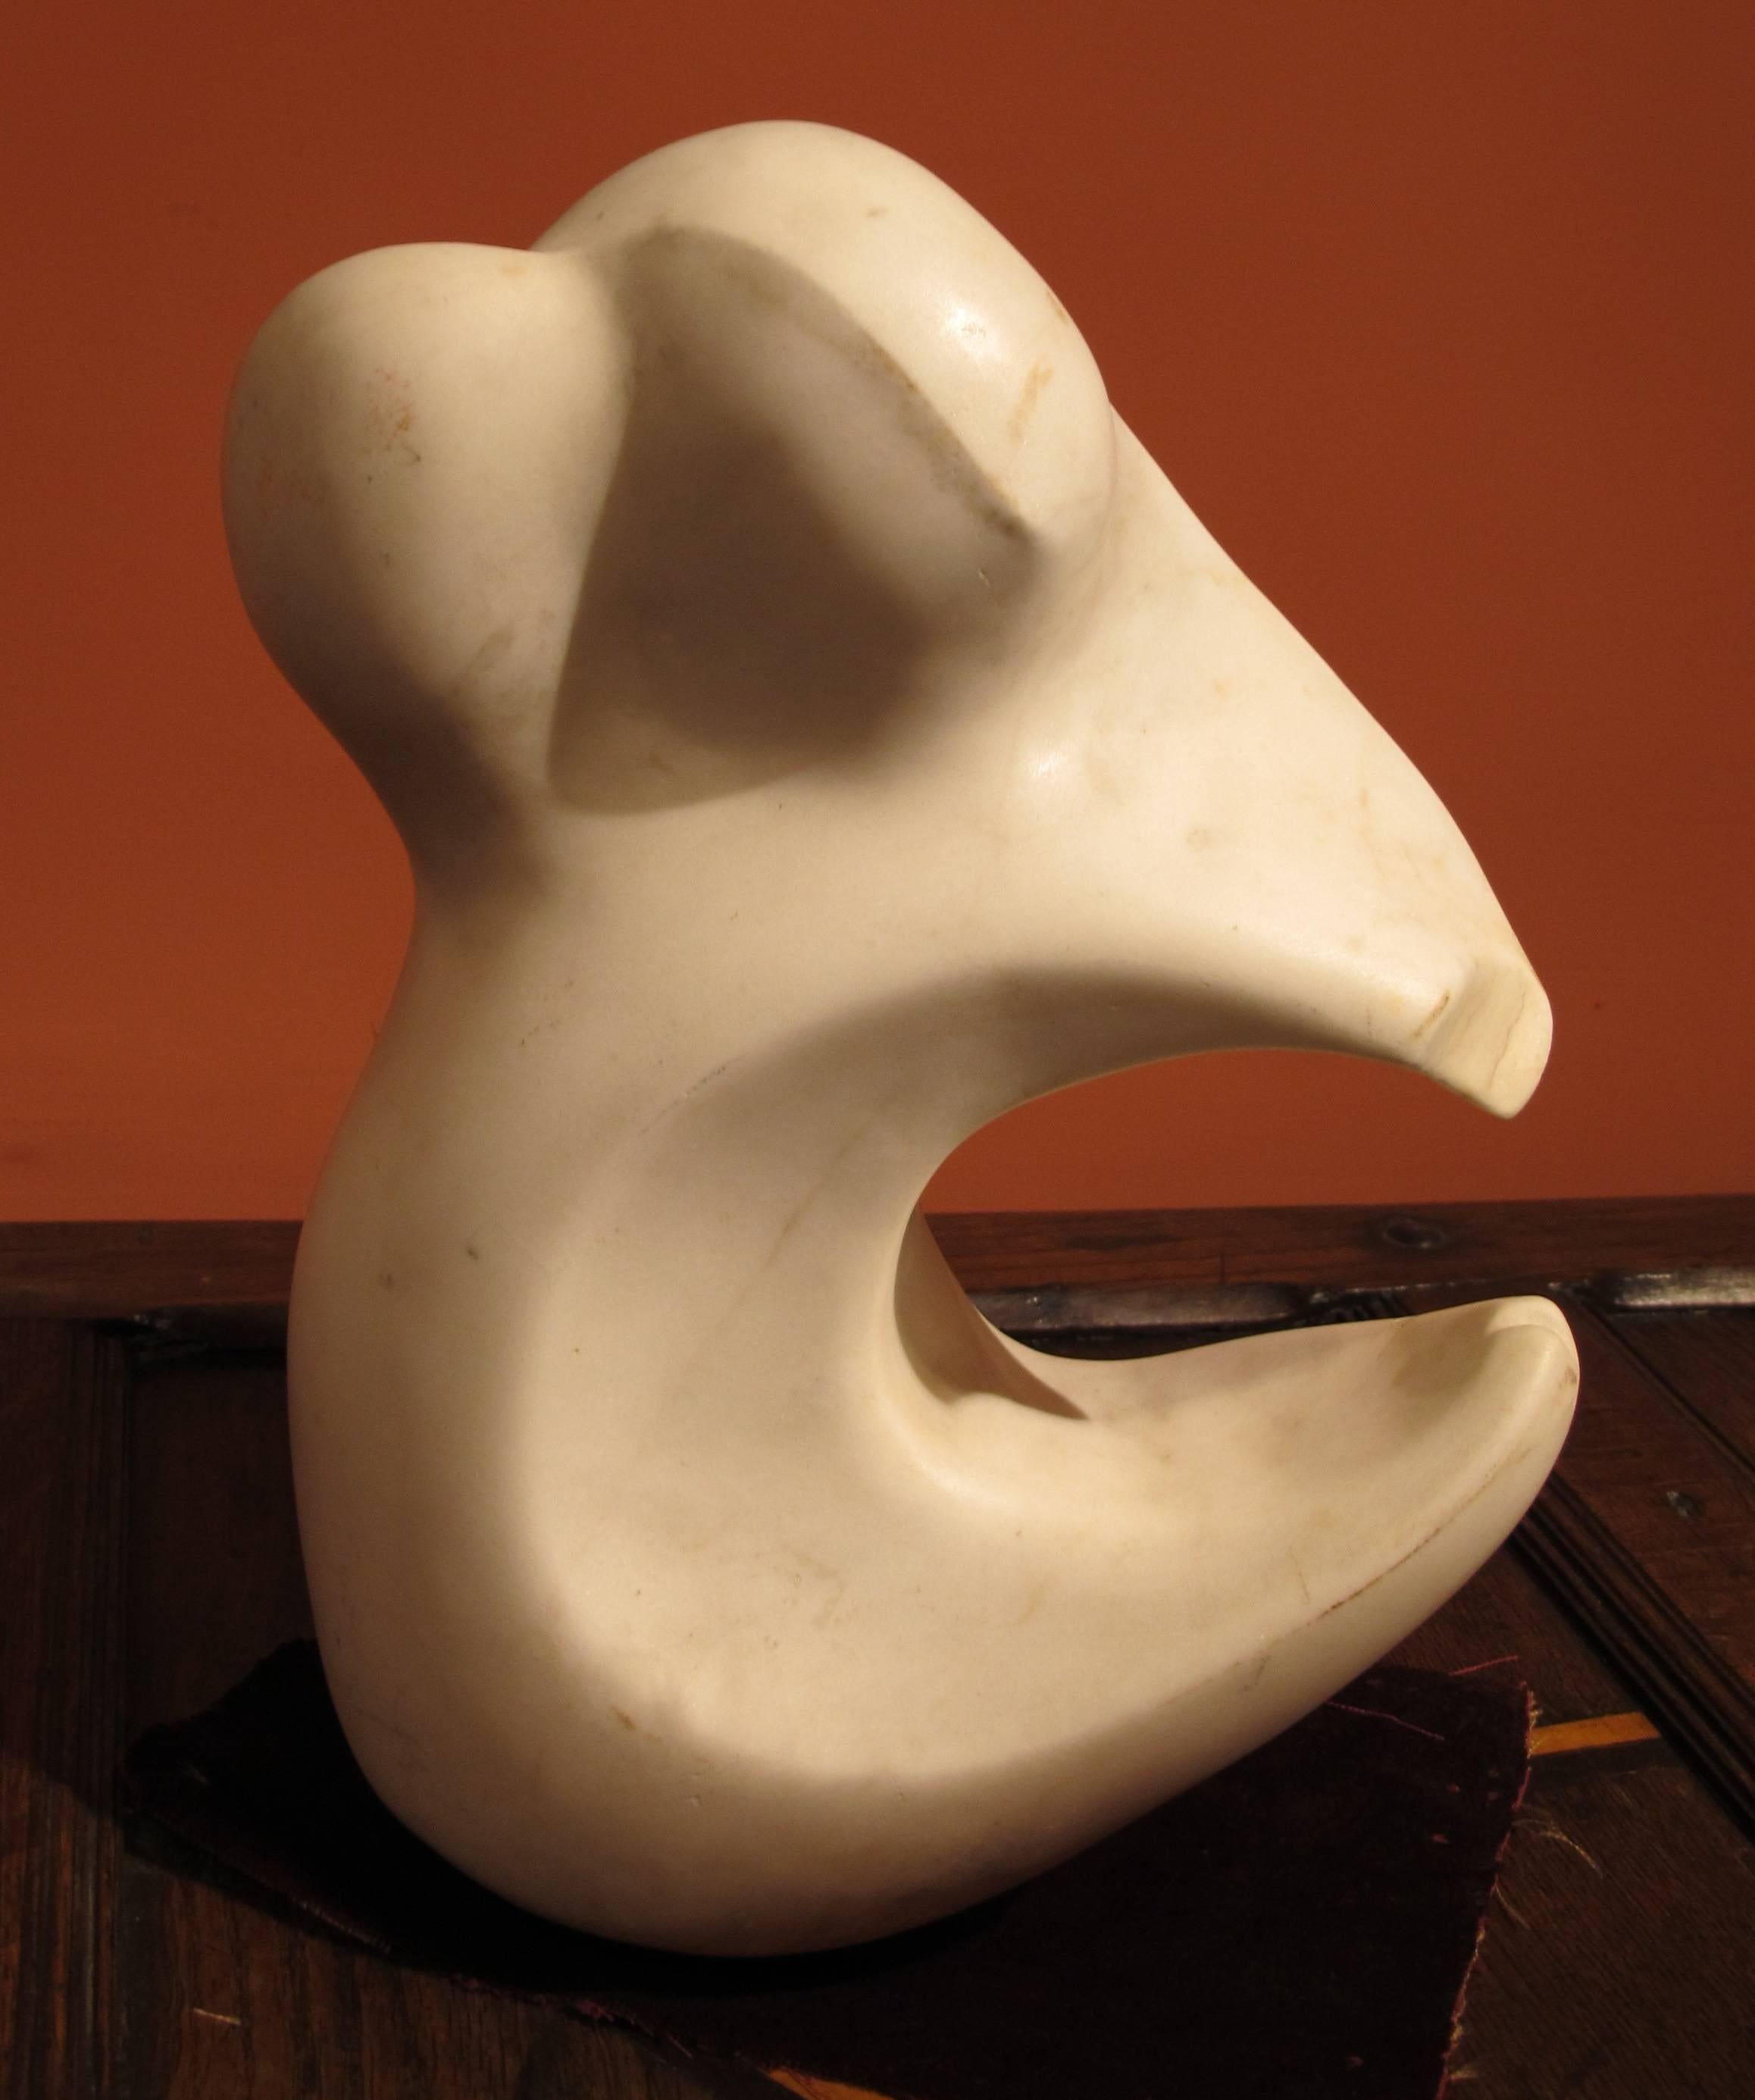 GALLO SALVATORE (1928)

ONTA 
1972

Carrara marble. 
Signed on lower edge

Height : 39 cm	
Width : 28 cm	  
Depth : 20 cm

A certificate of authenticity by the artist is enclosed

